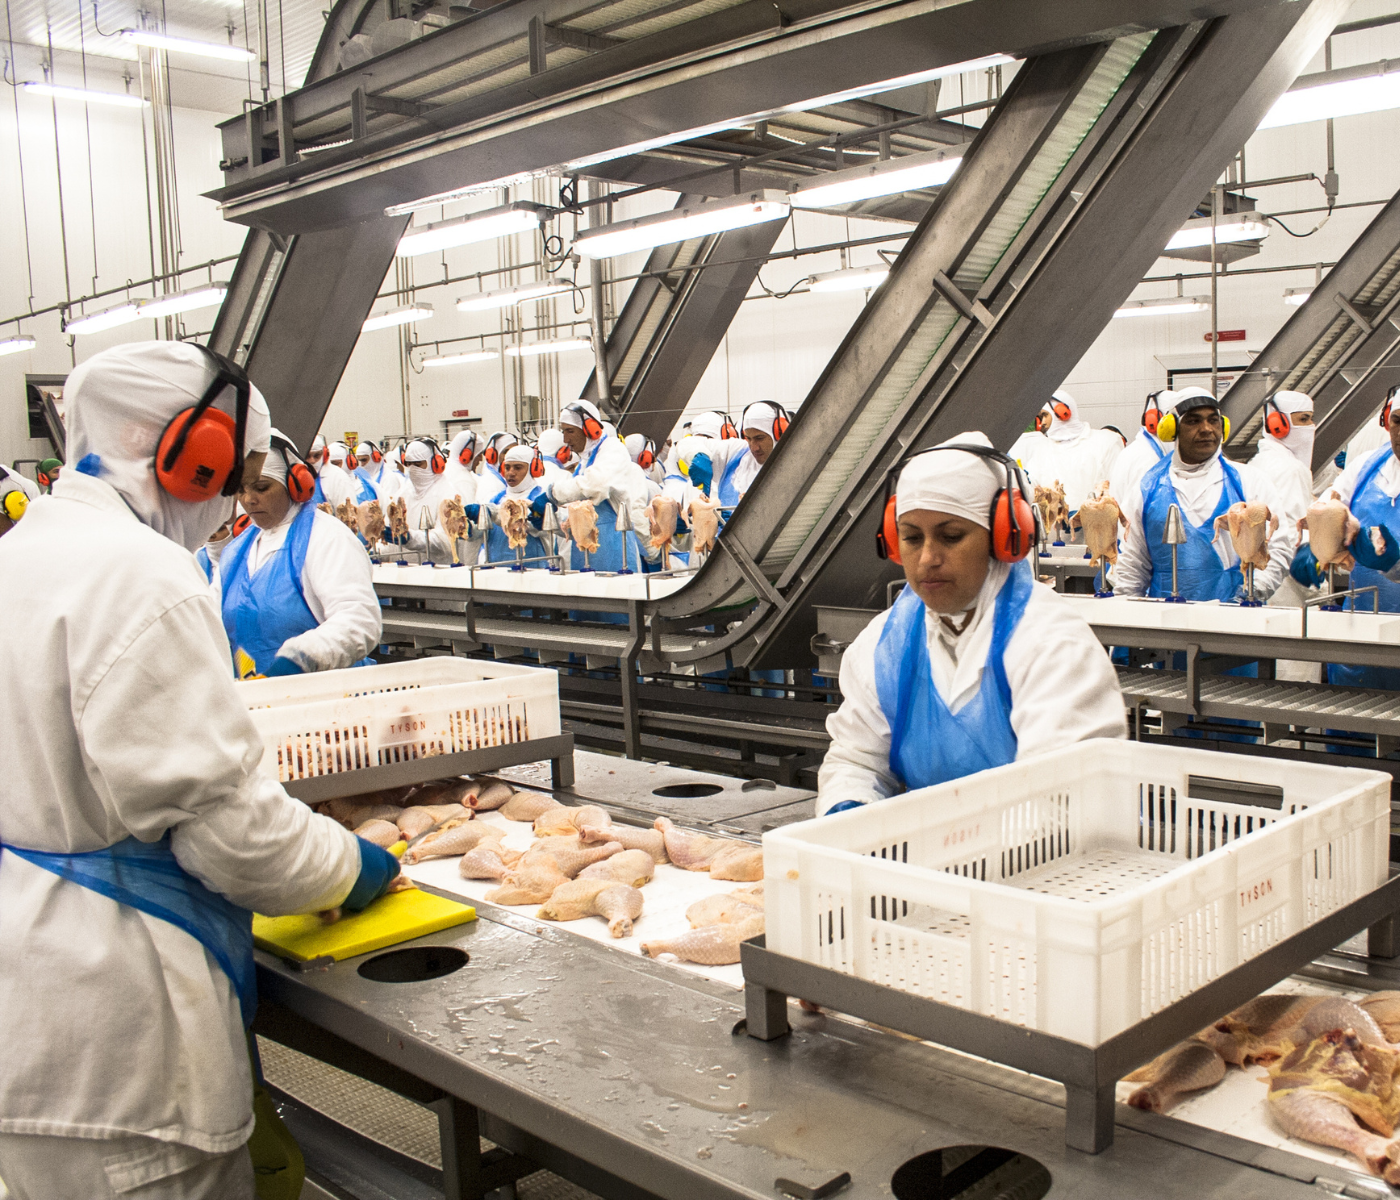 U.S. settles claims against poultry processors over worker treatment